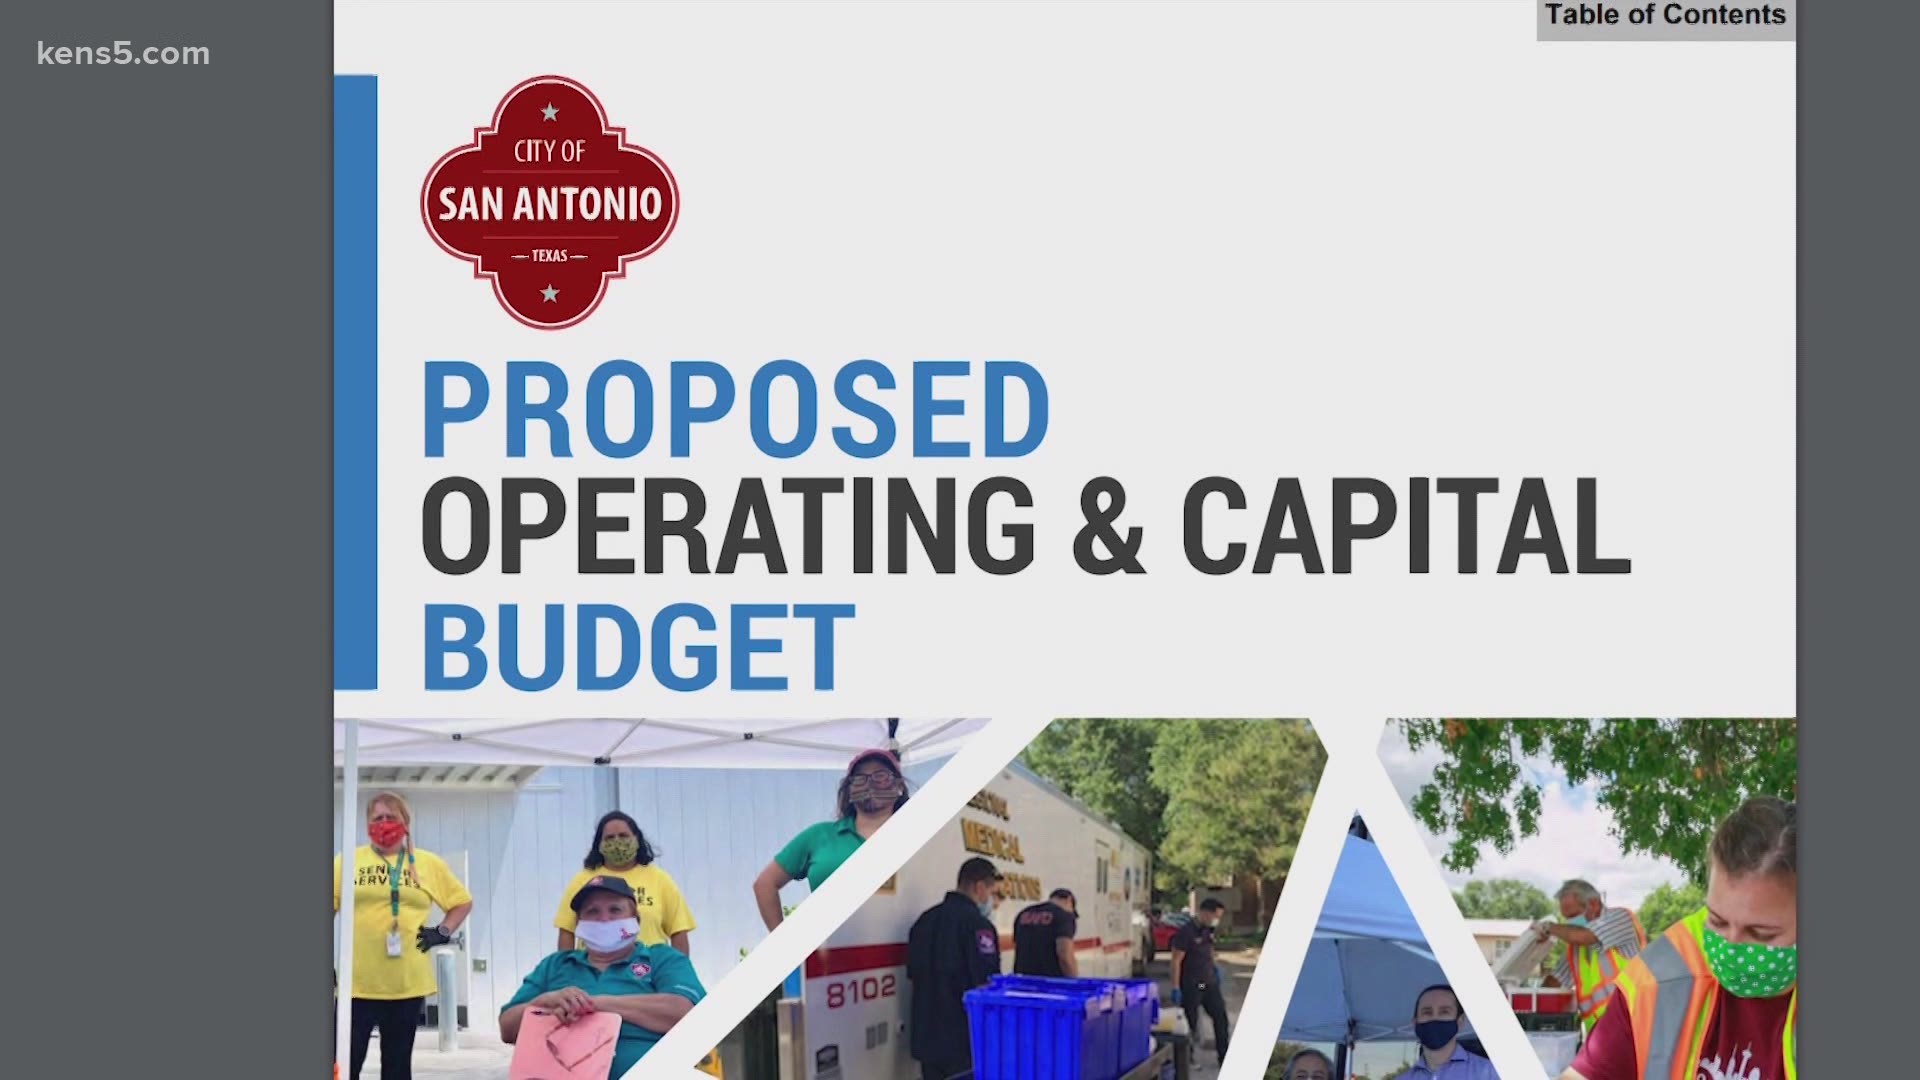 The budget doesn't defund the SAPD, and officers got 5% raises while the overtime budget went down. The public safety portion of the budget costs $827 million.